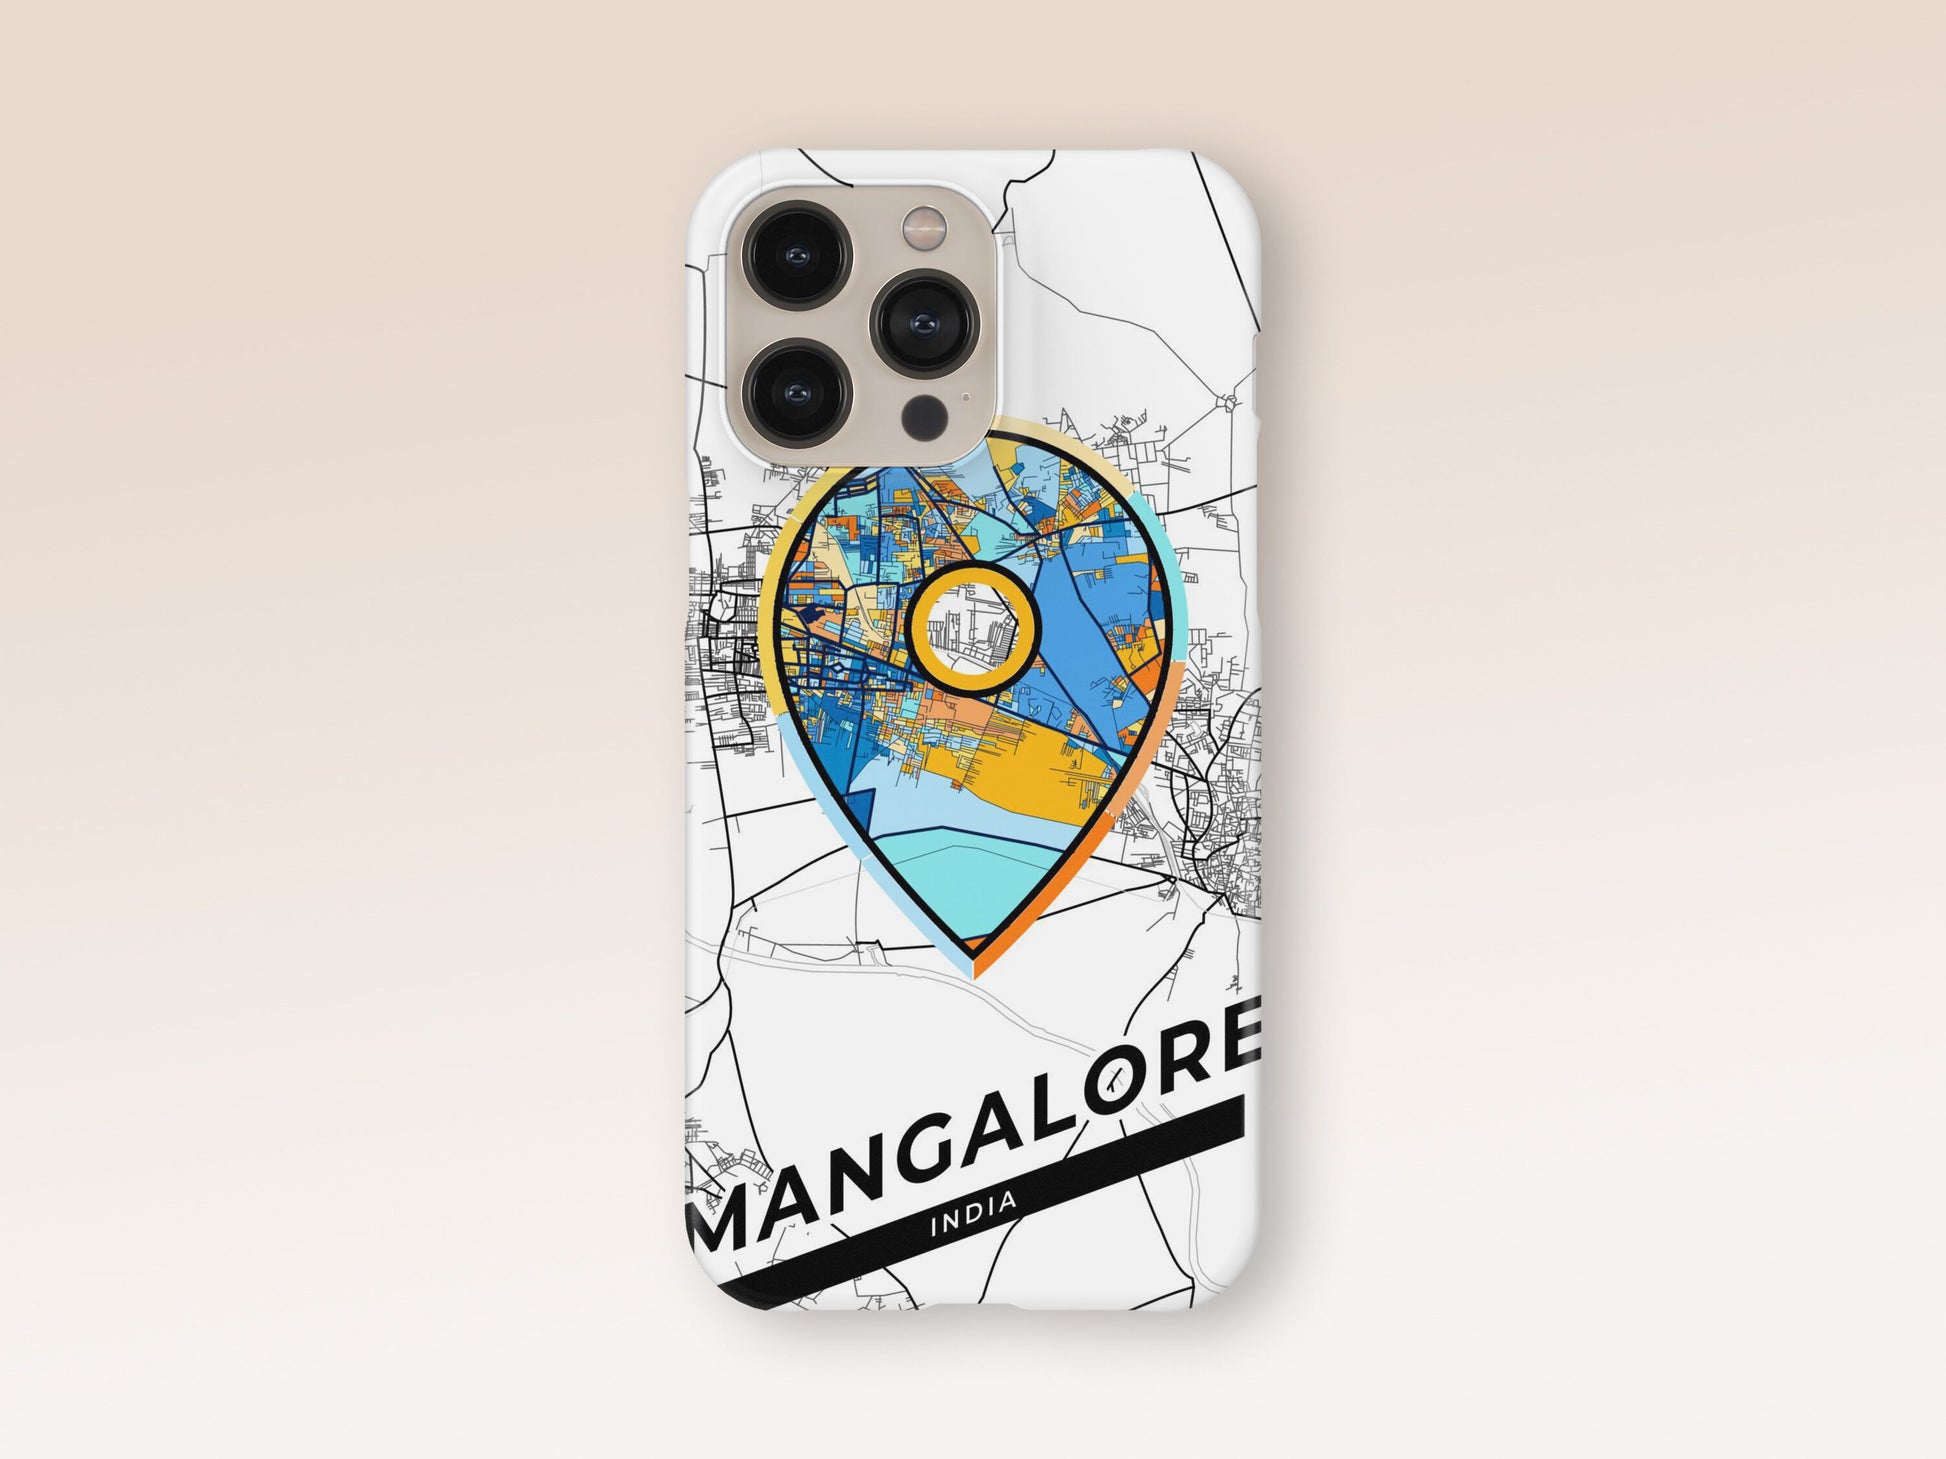 Mangalore India slim phone case with colorful icon. Birthday, wedding or housewarming gift. Couple match cases. 1